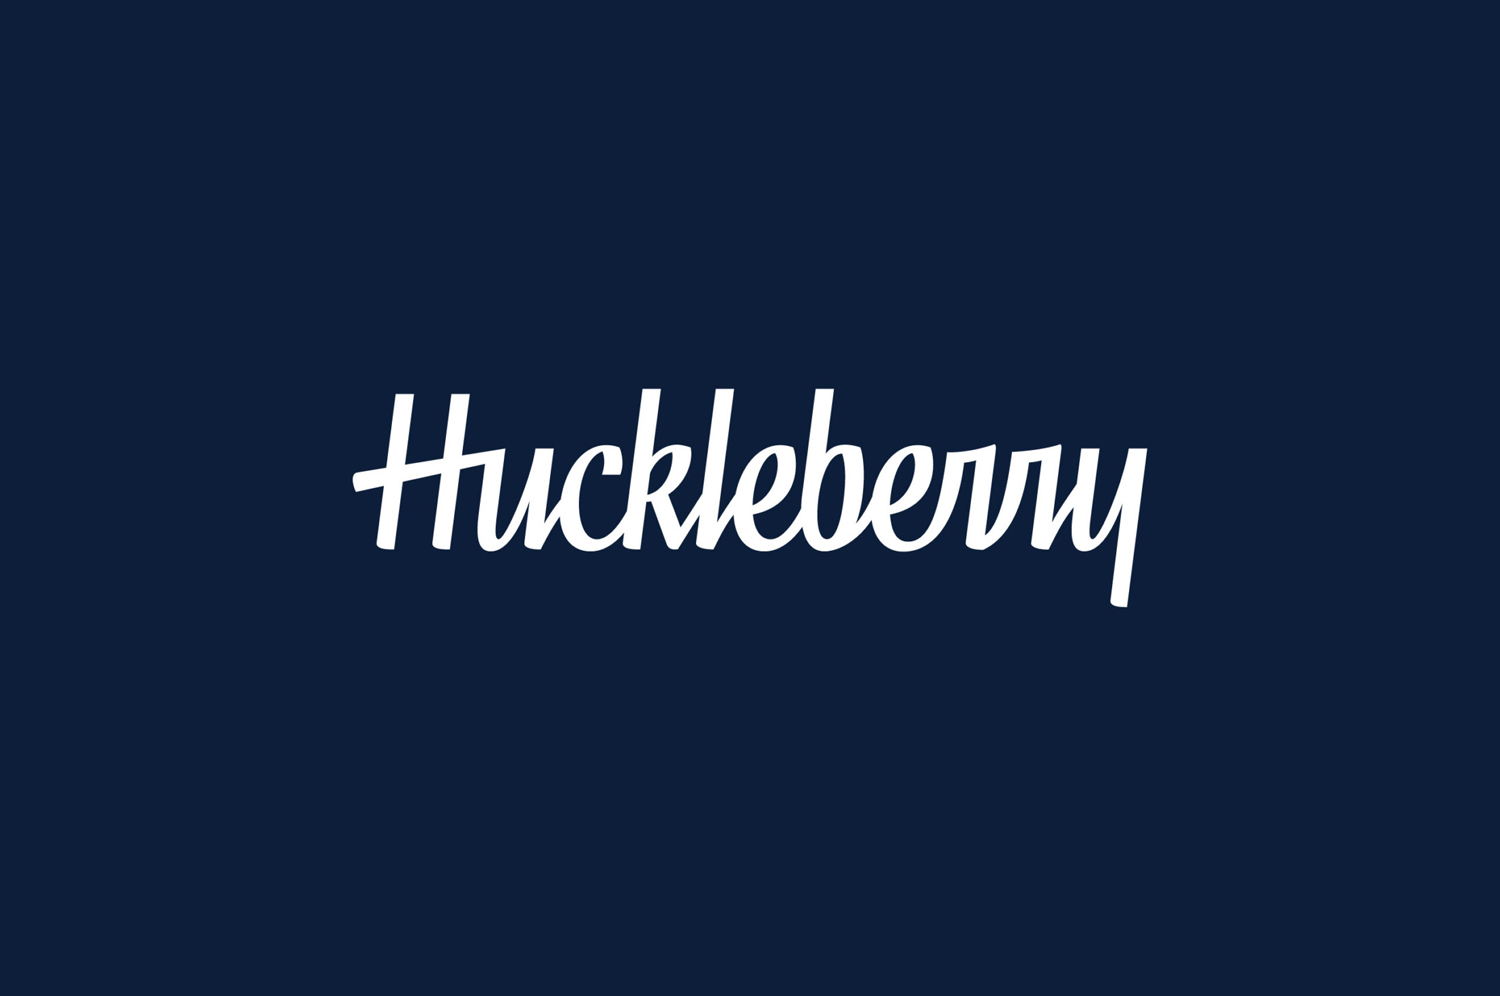 Creative Logotype Gallery & Inspiration: Huckleberry Roasters by Mast, United States